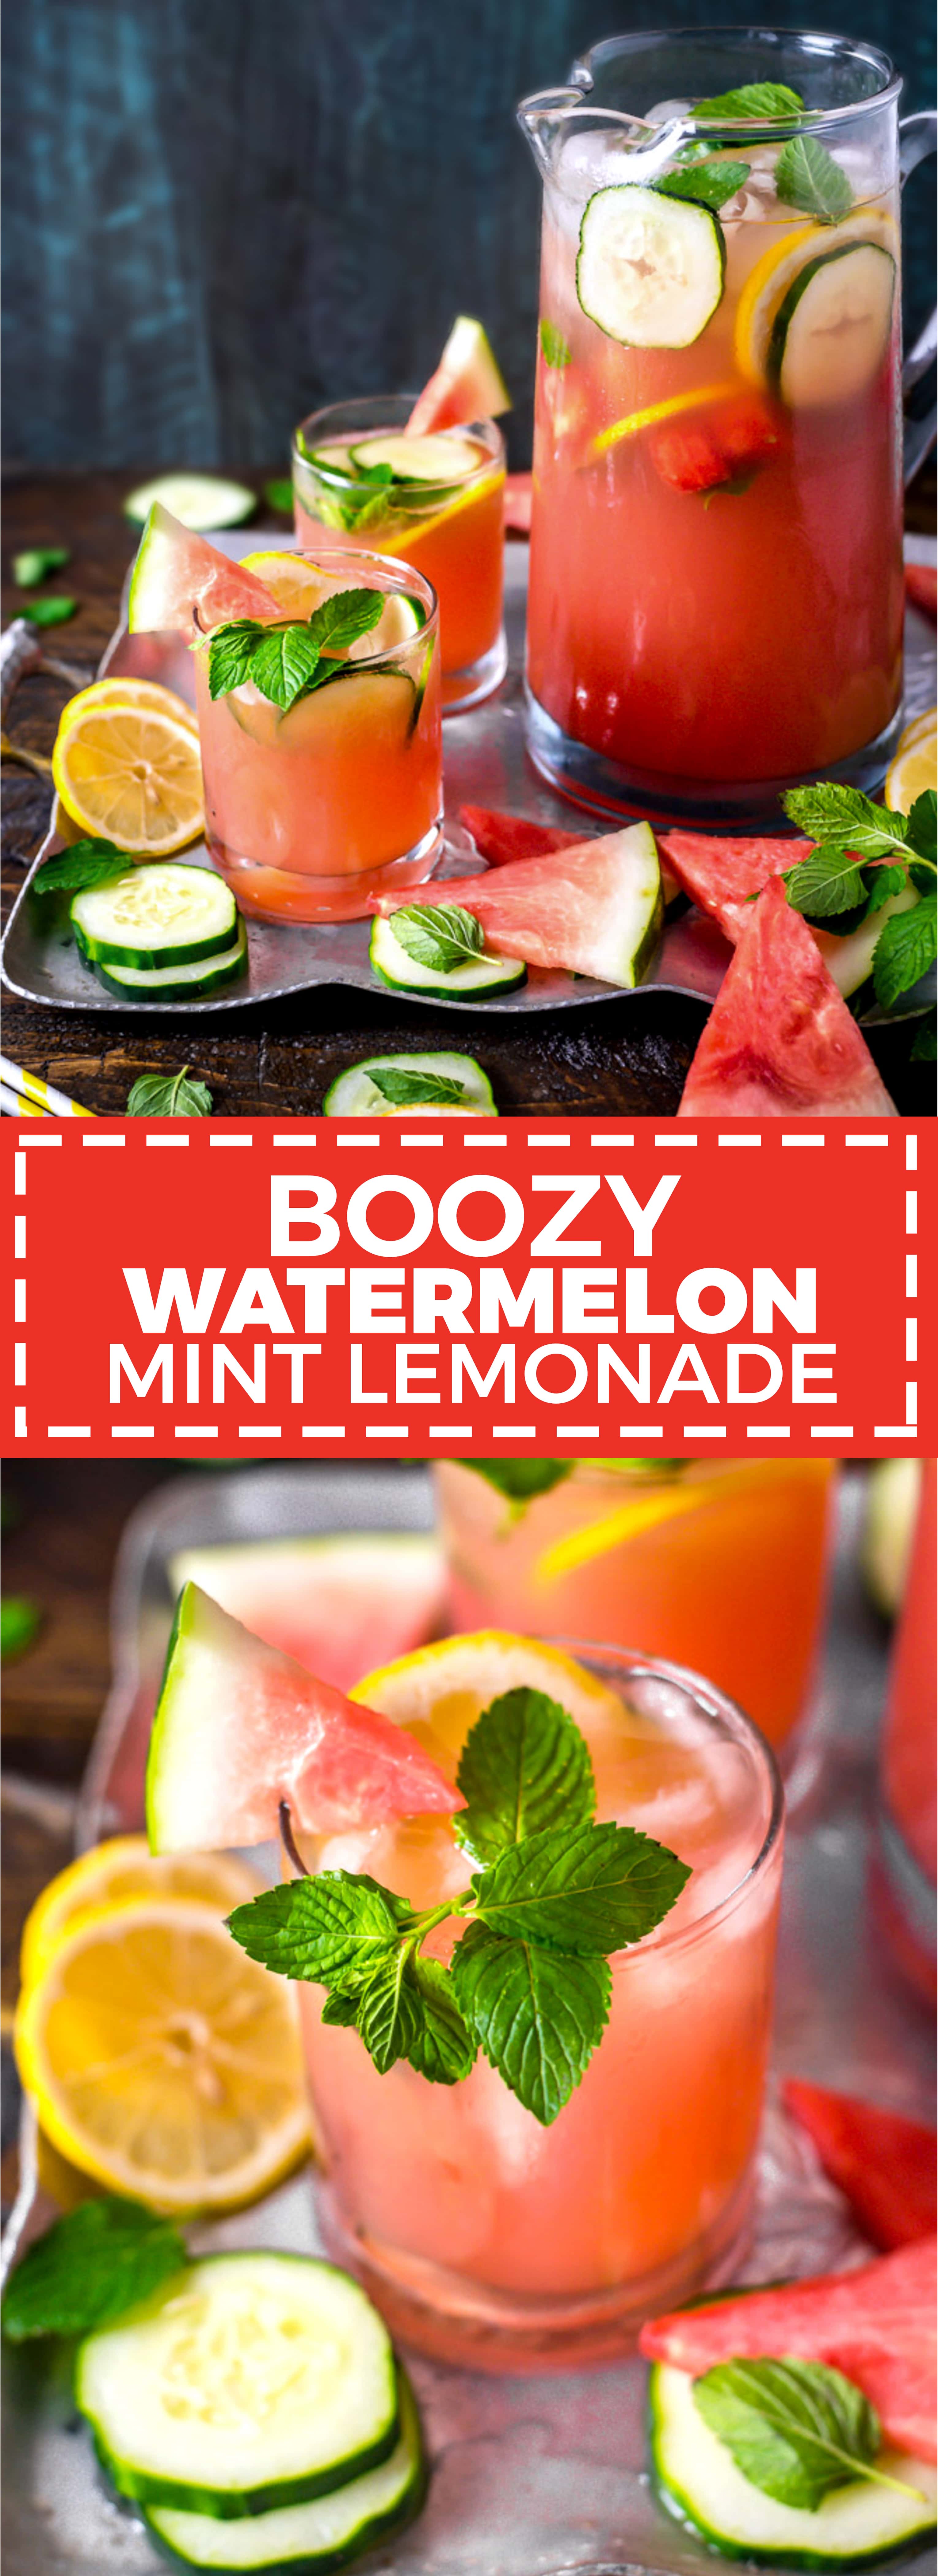 Boozy Watermelon Mint Lemonade. Made from fresh watermelon, cucumber, lemon juice, and mint, this super refreshing cocktail is perfect for summer cookouts! | hostthetoast.com